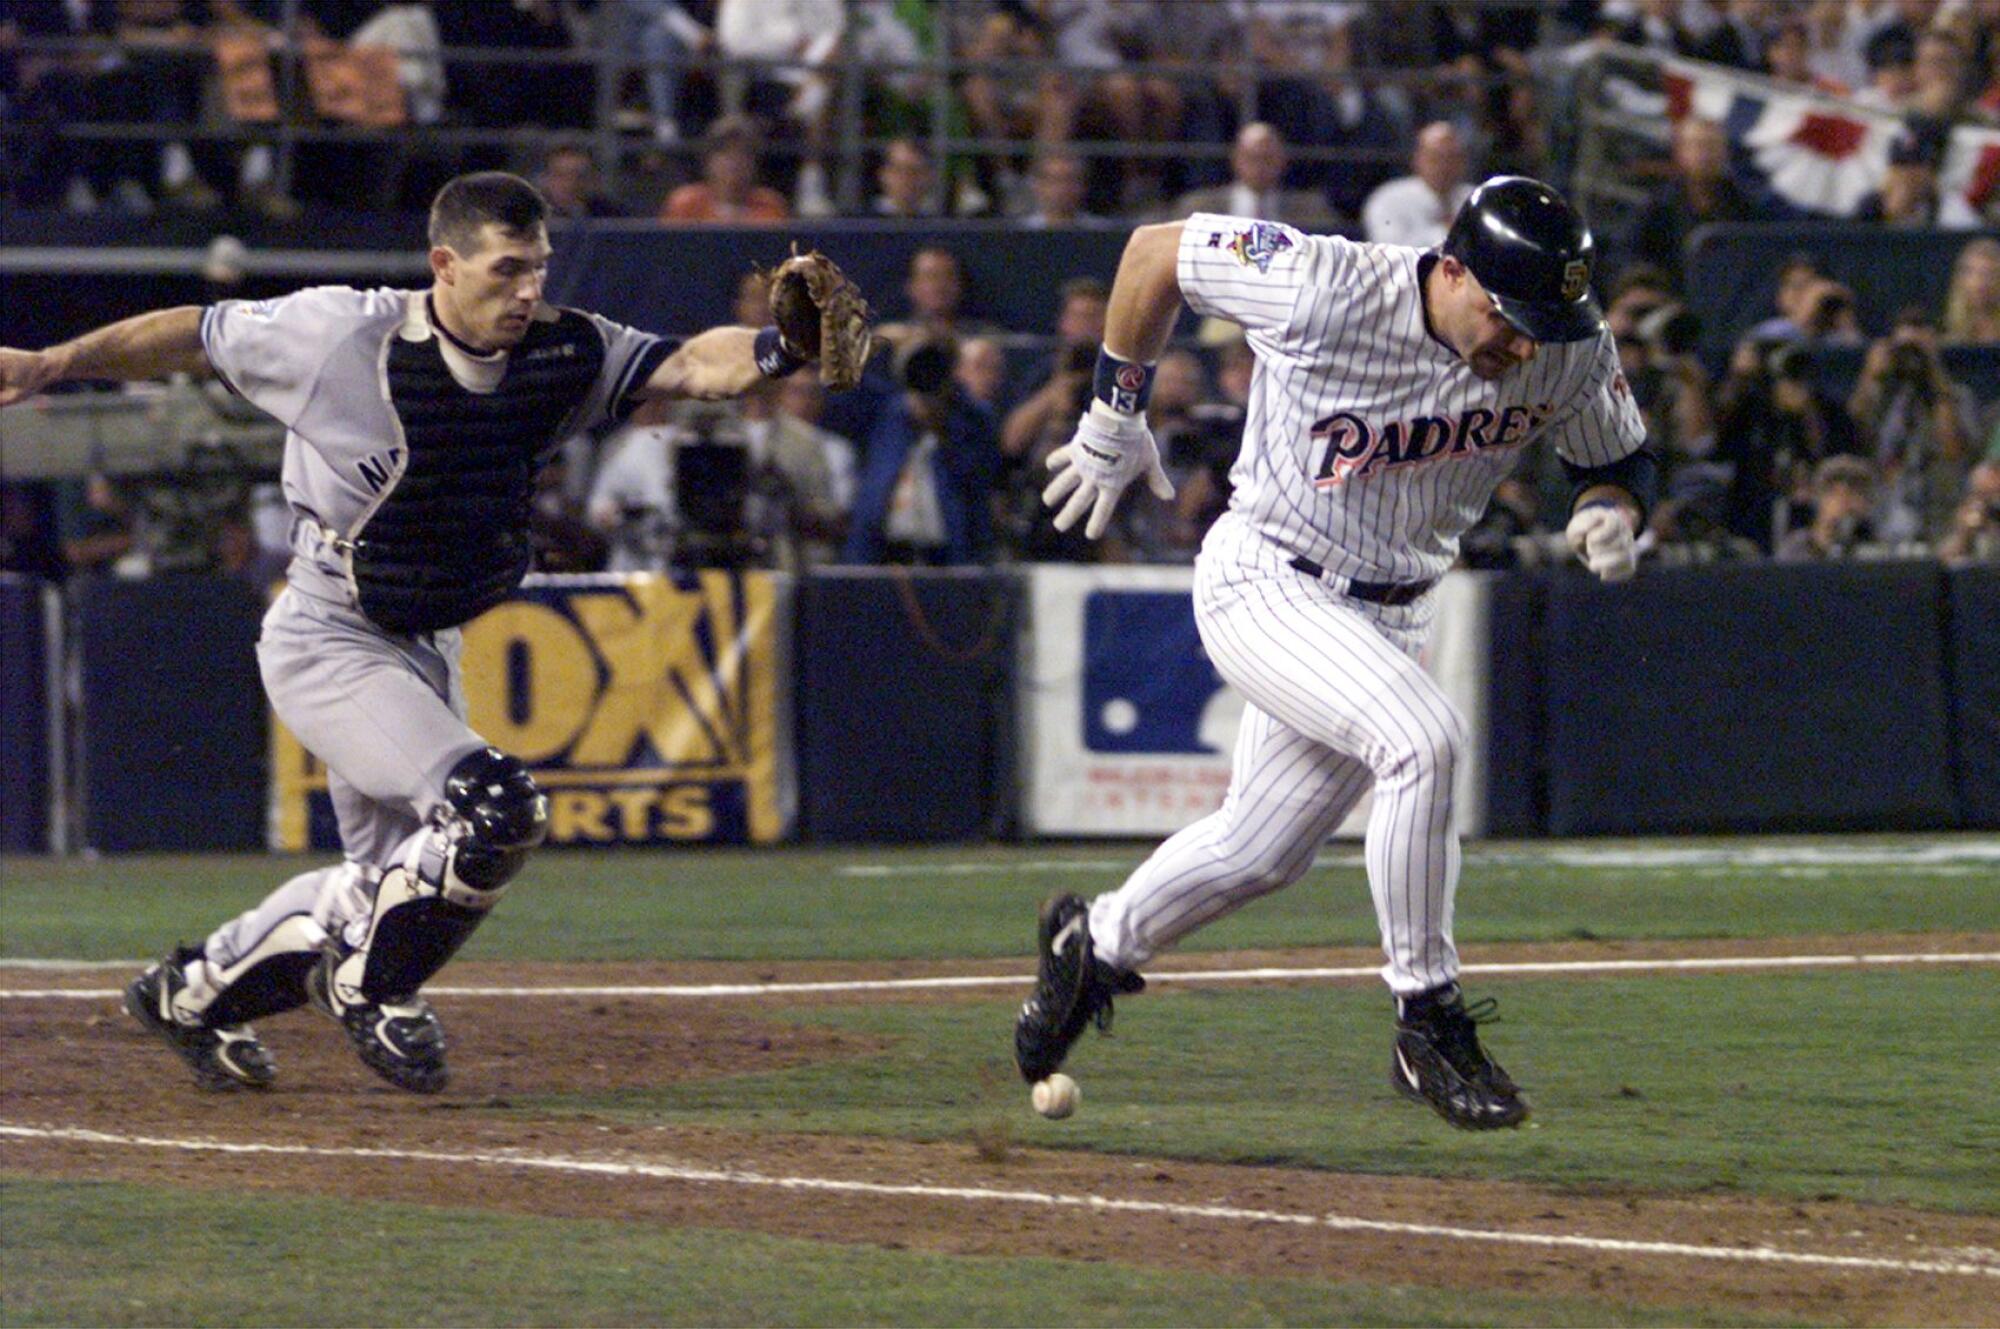 San Diego Padres batter Jim Leyritz is thrown out at first by Yankees catcher Joe Girardi.